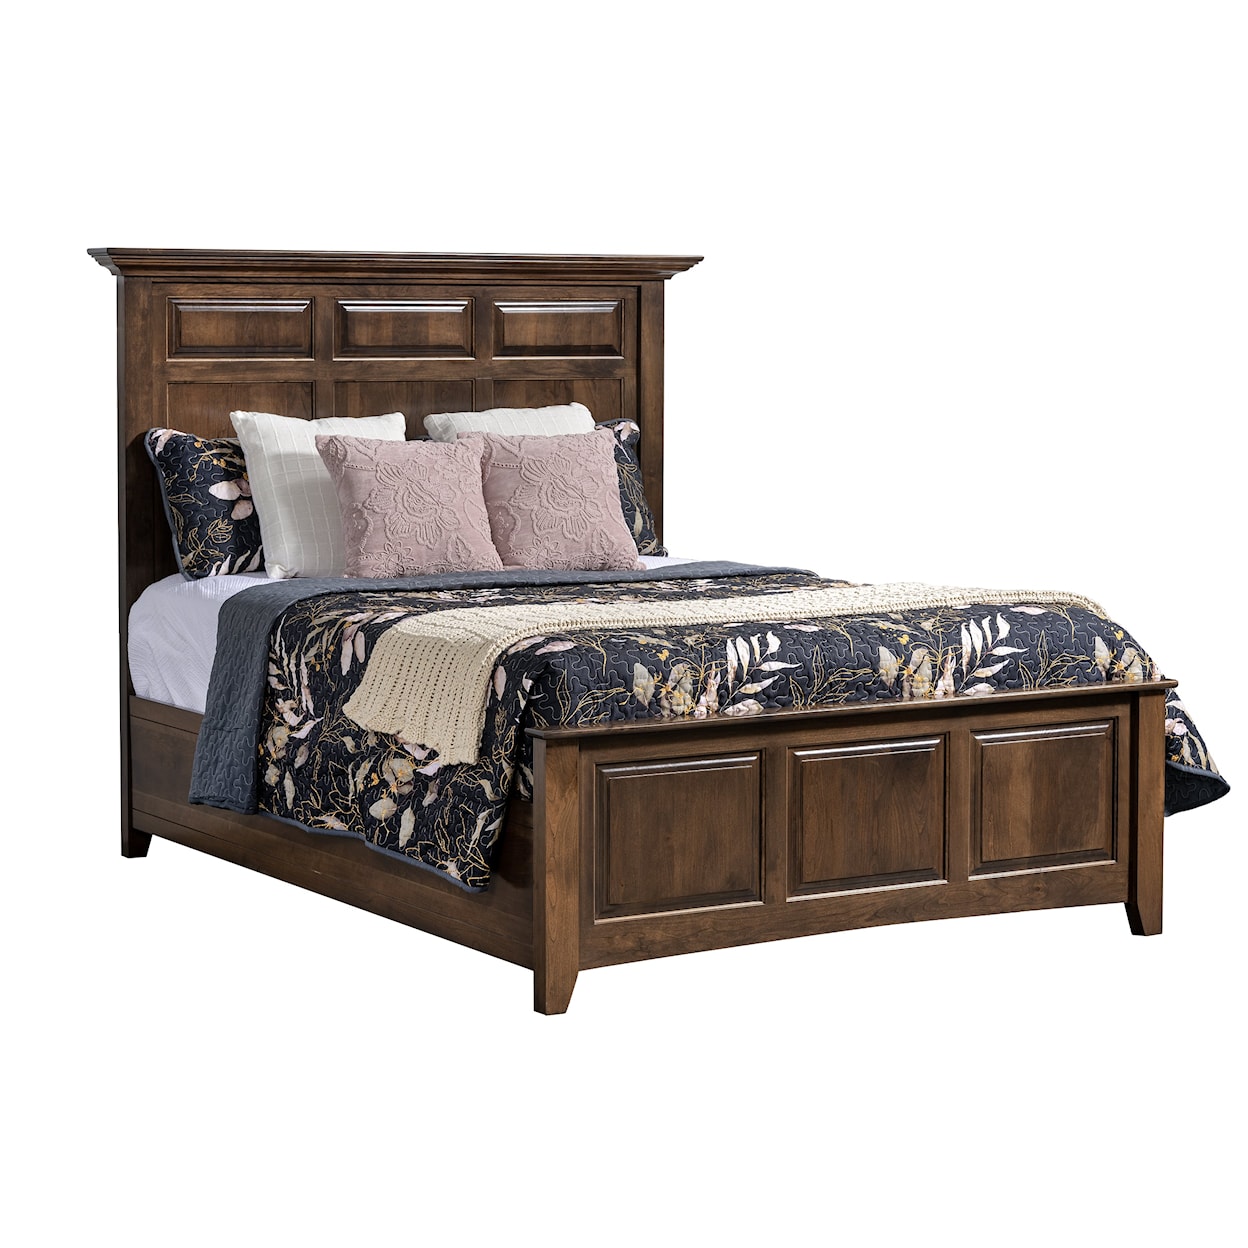 Millcraft Albany Queen Mantel Panel Bed